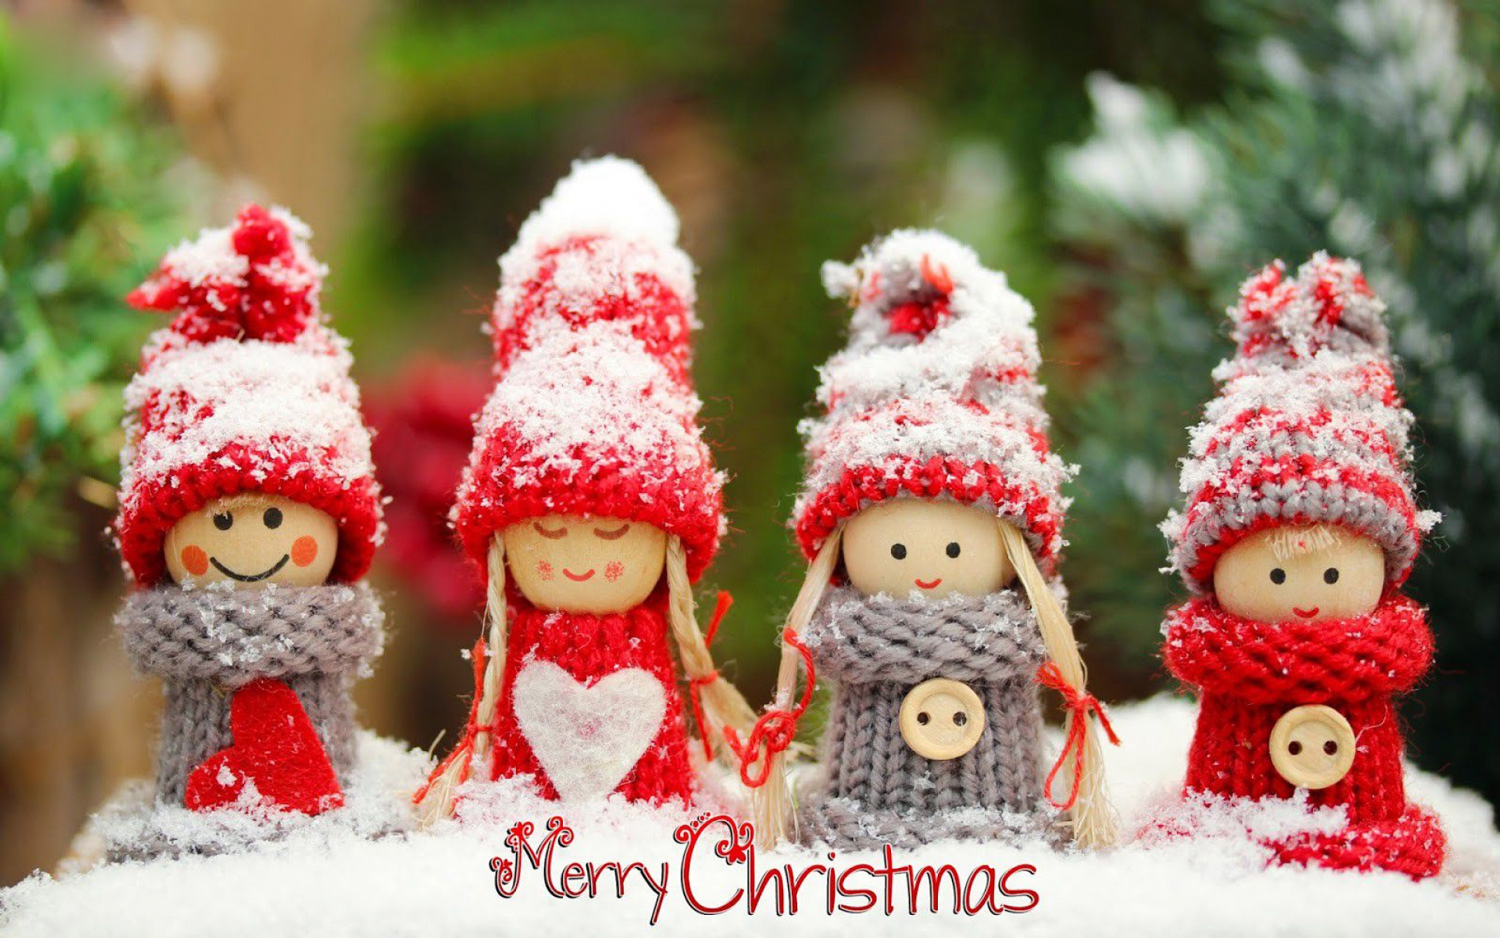 Merry Christmas Images for Whatsapp DP -Download